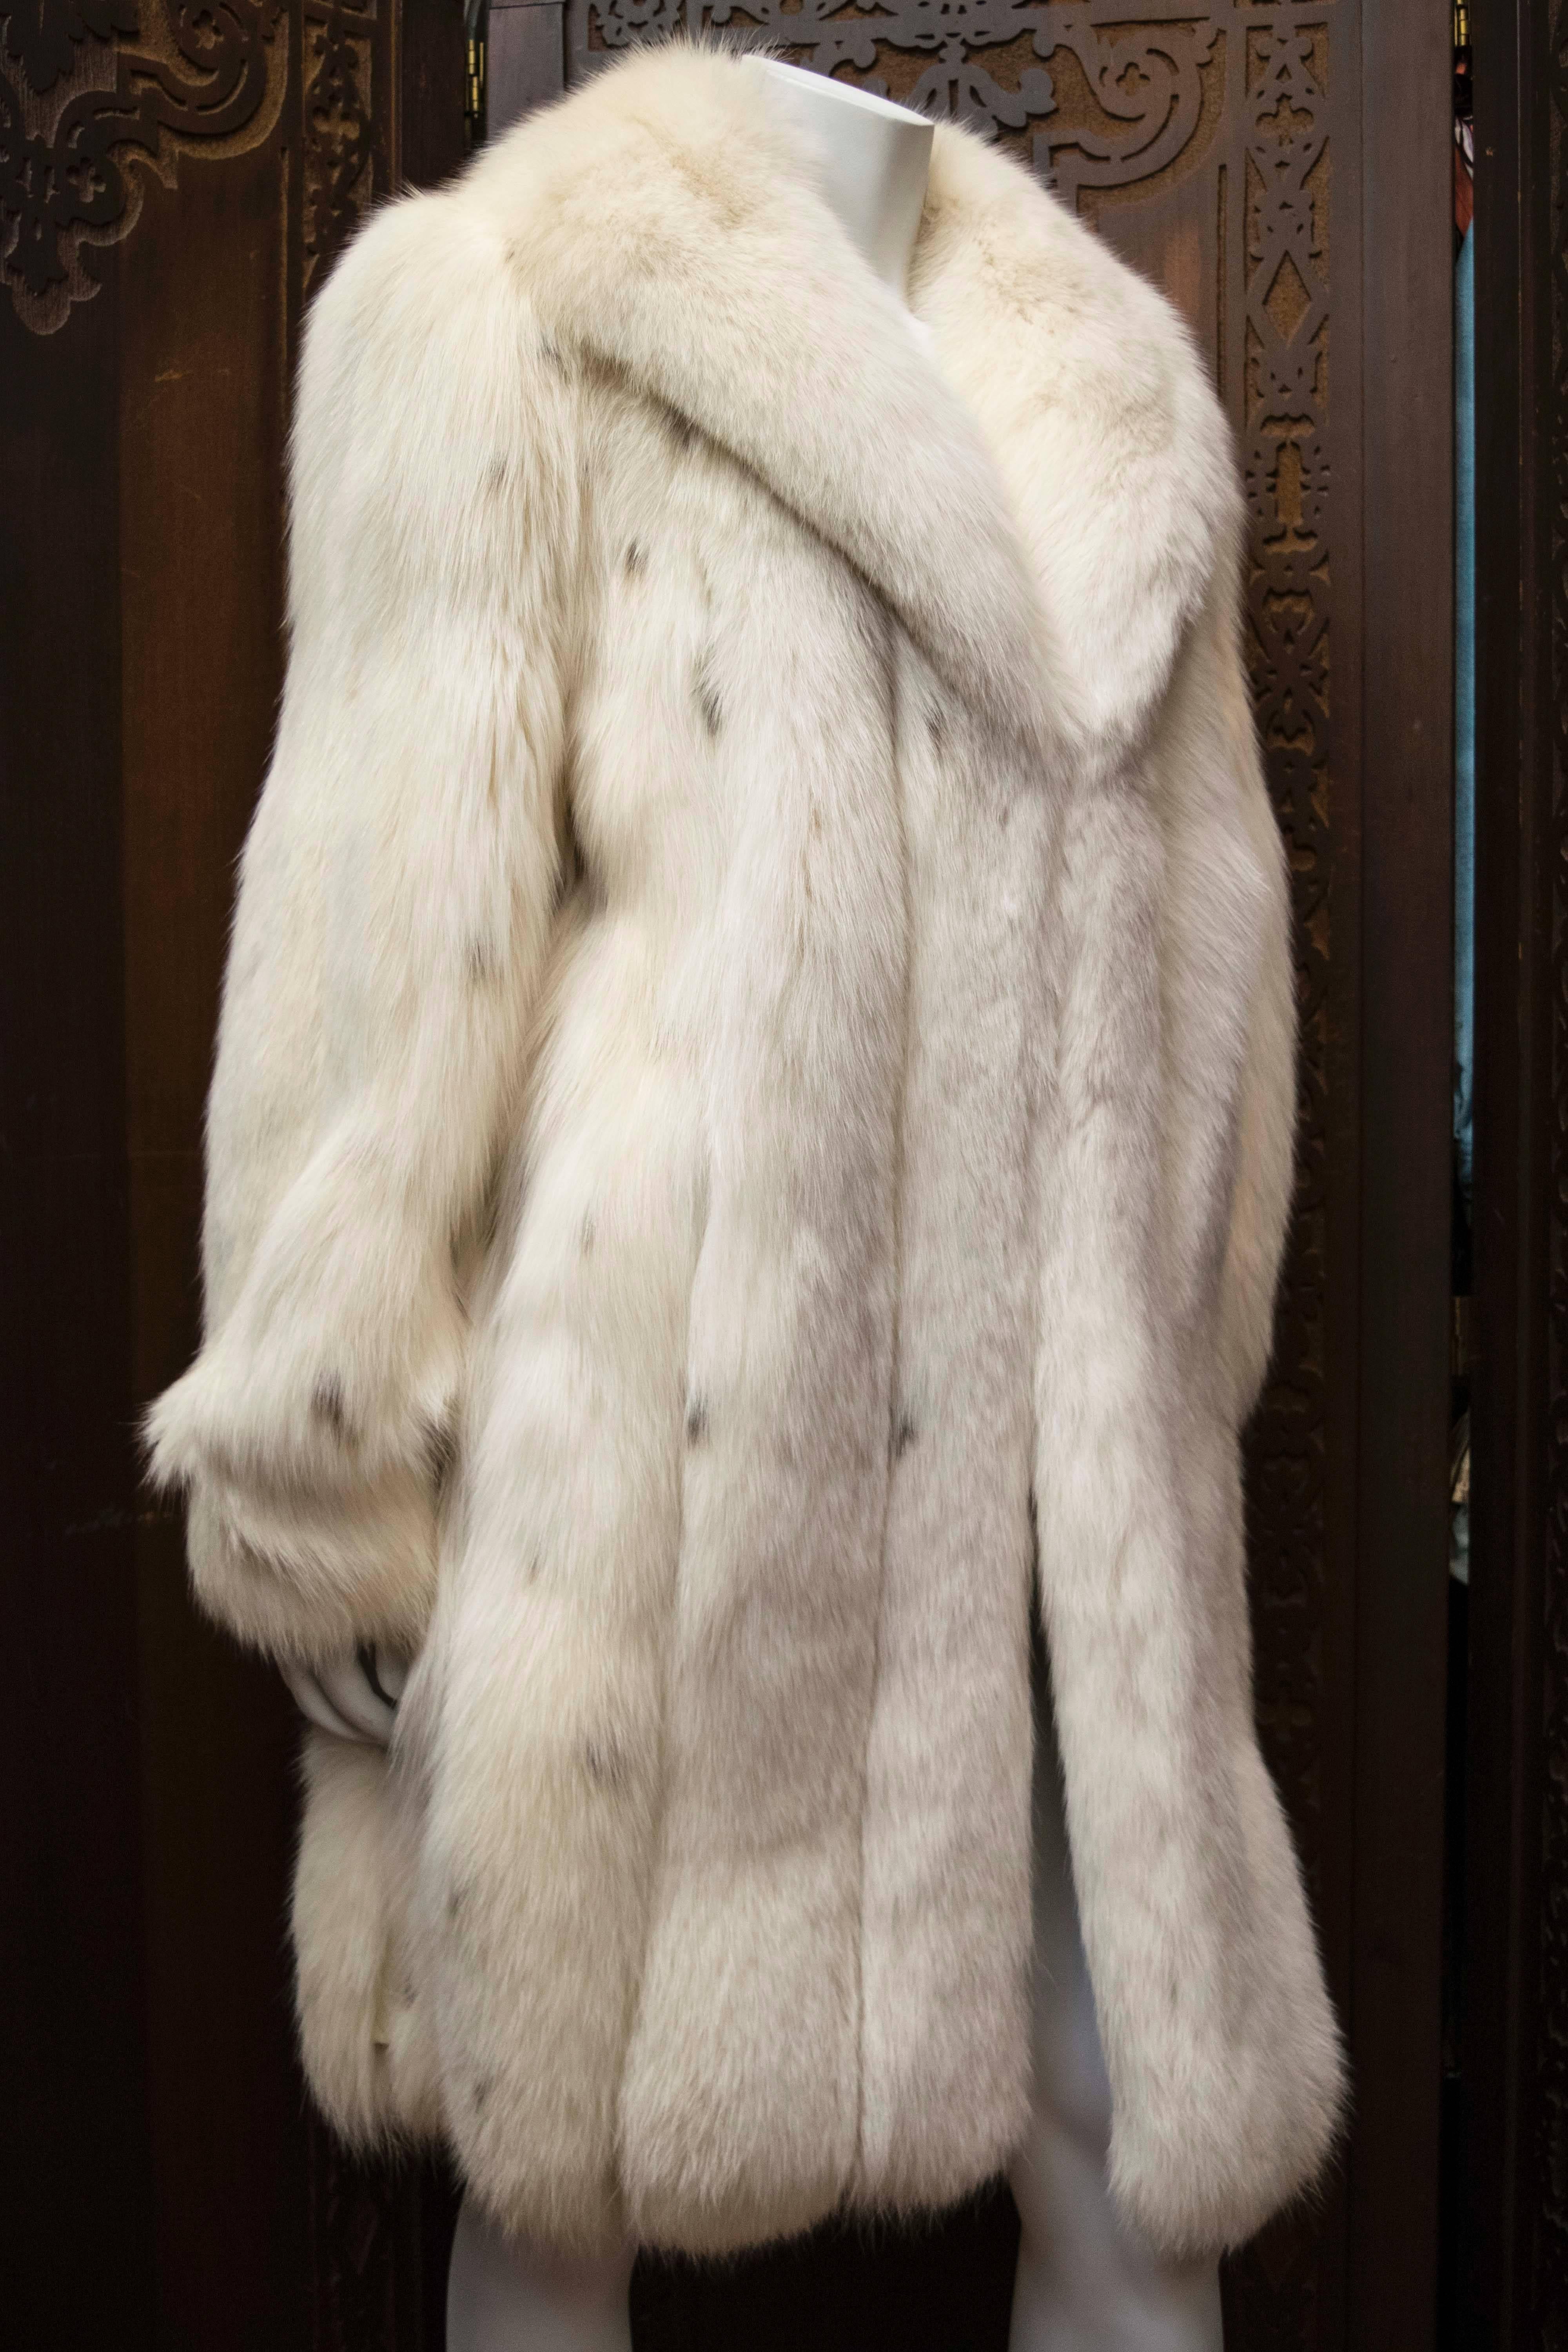 Ivory Spotted Fox Fur Coat

Opulent and rare spotted fox fur coat, circa 1970. The fur is in wonderful condition, with long silky guard hairs and thick undercoat. 

B 40
H 42
L 37